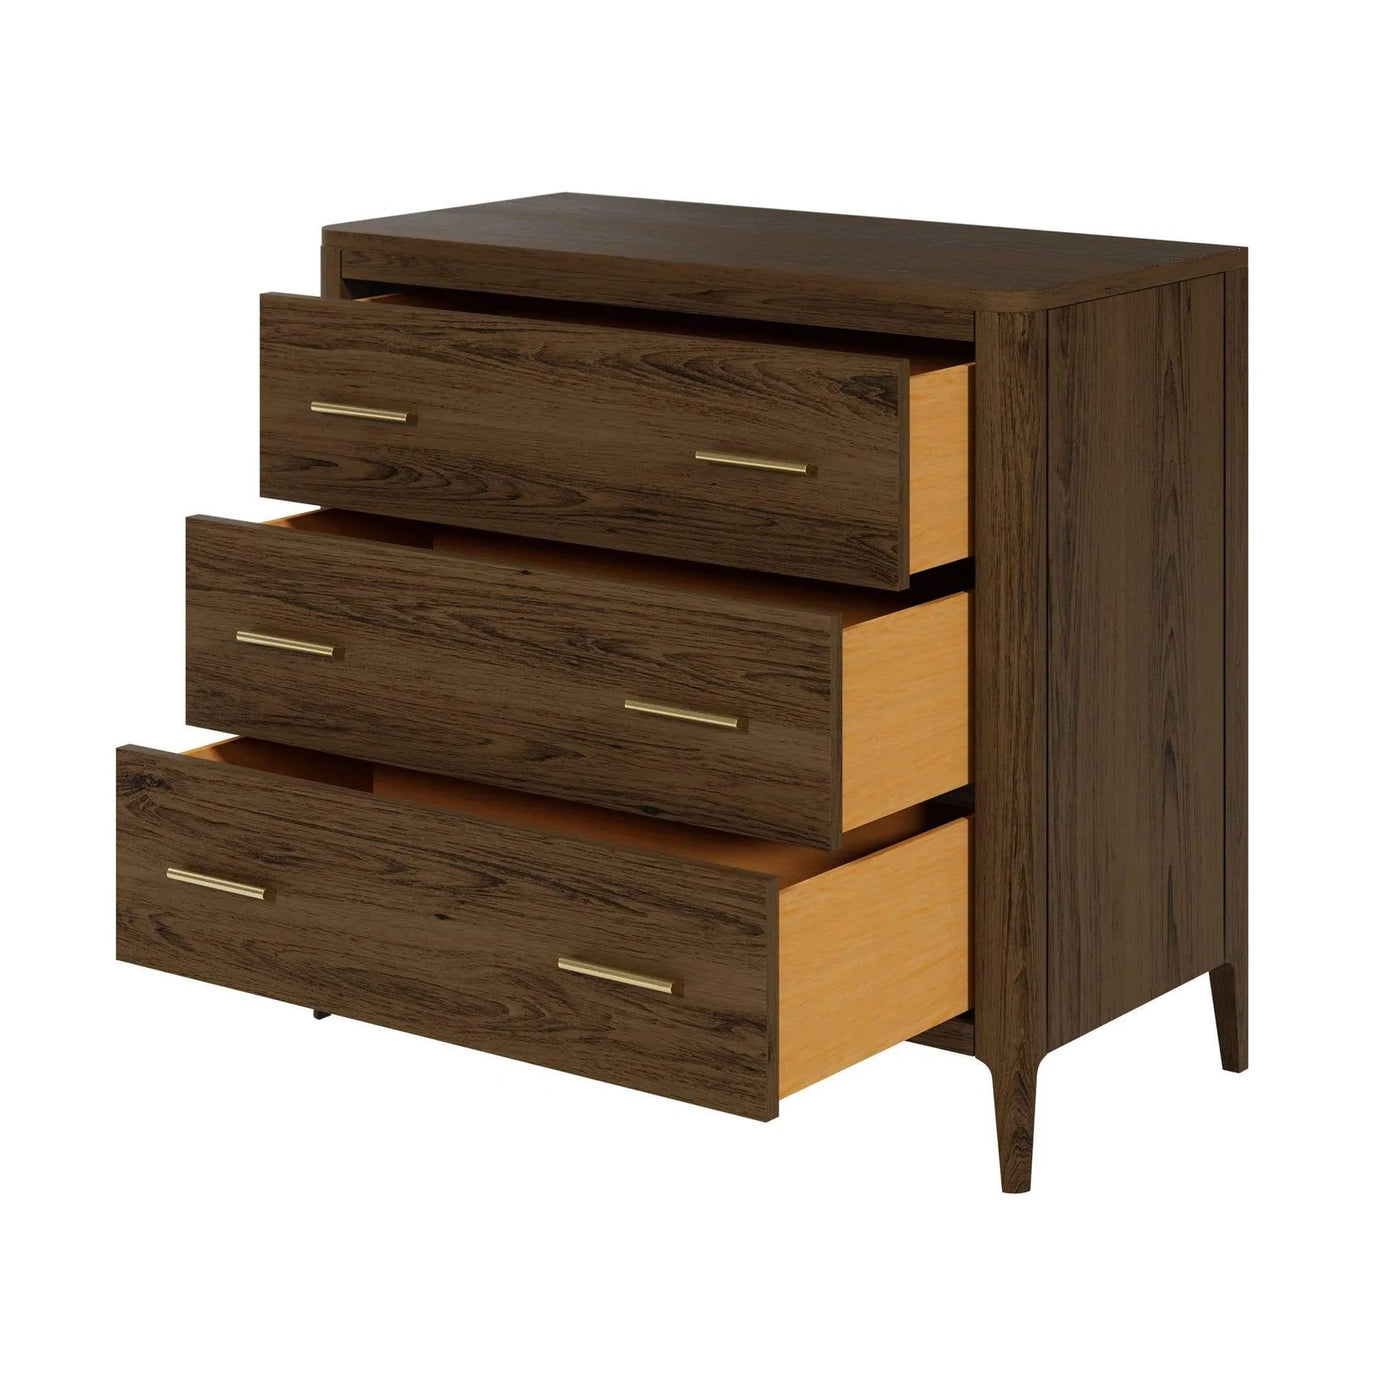 DI Designs Abberley Chest Of Drawers - Brown-Esme Furnishings